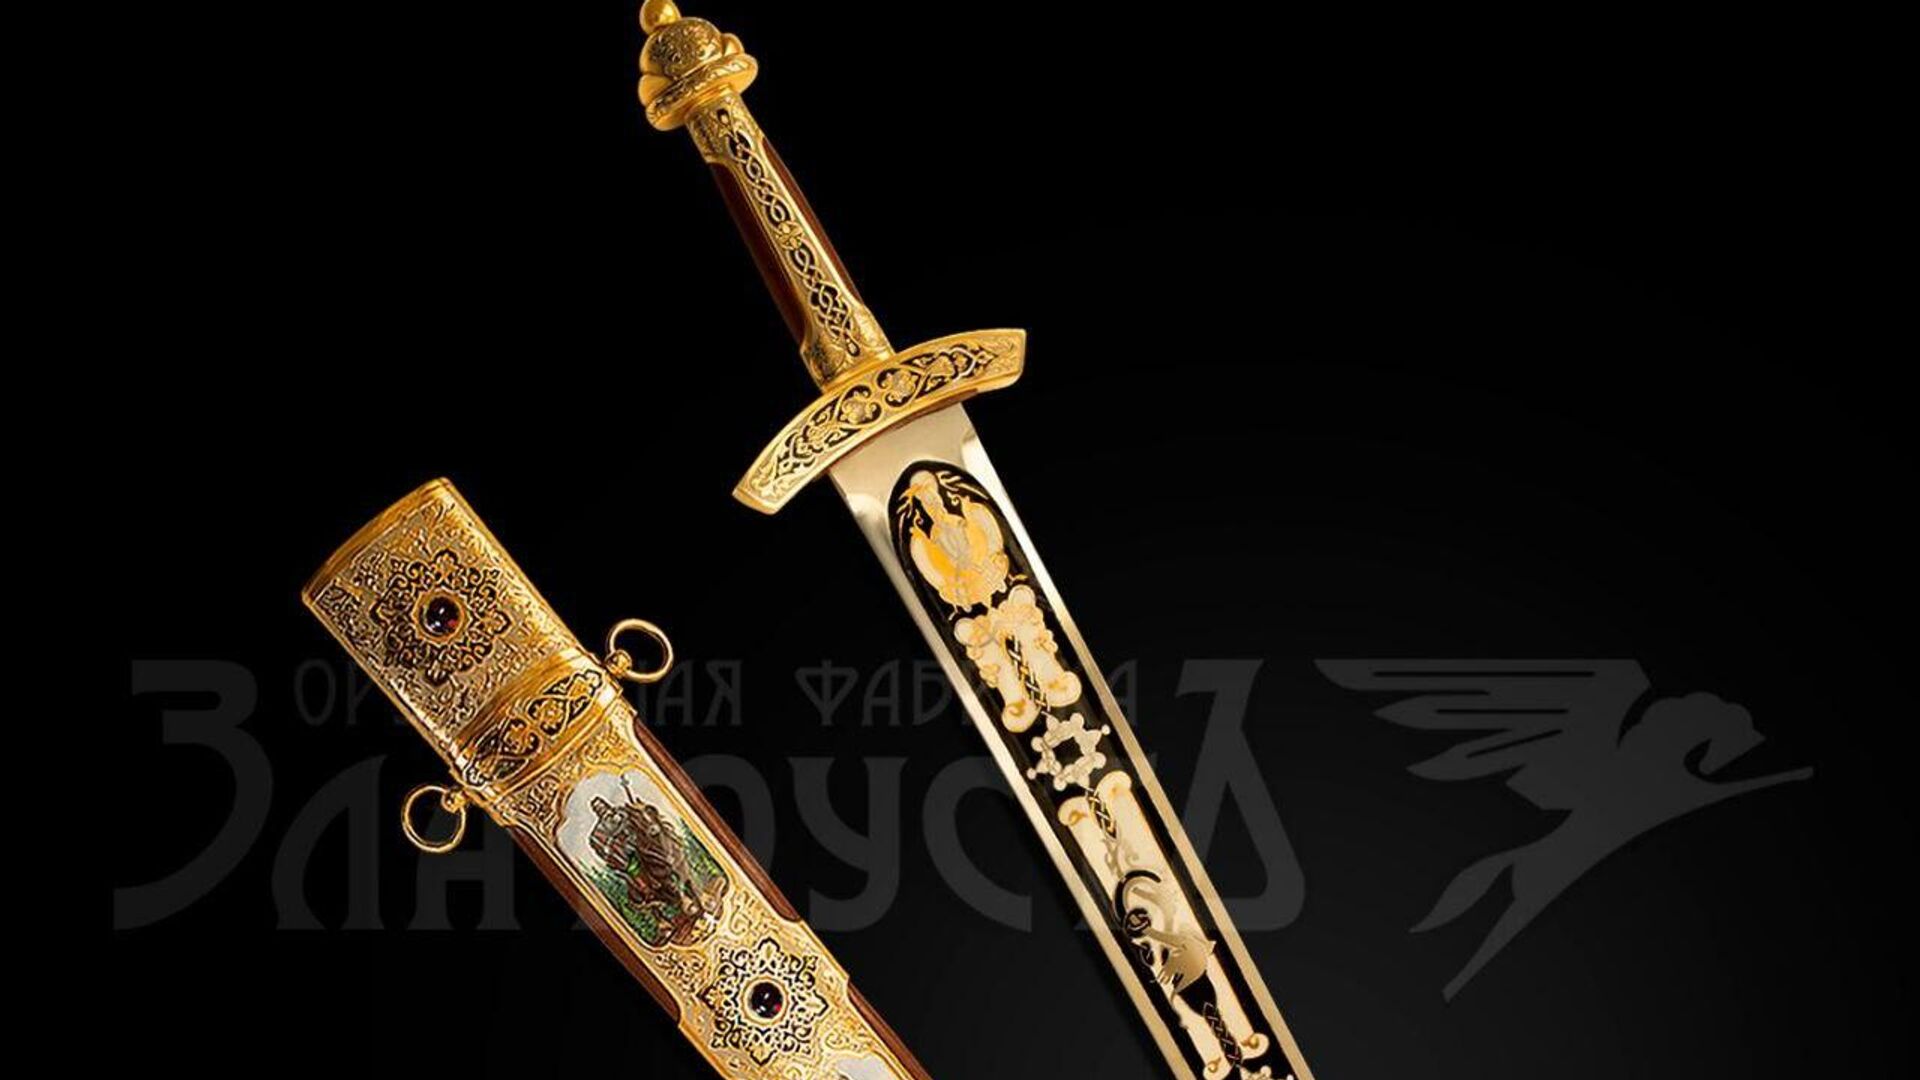 Kim Jong-Un was presented with a sword modeled after an 18th century sword during his visit to Russia - Sputnik International, 1920, 19.09.2023